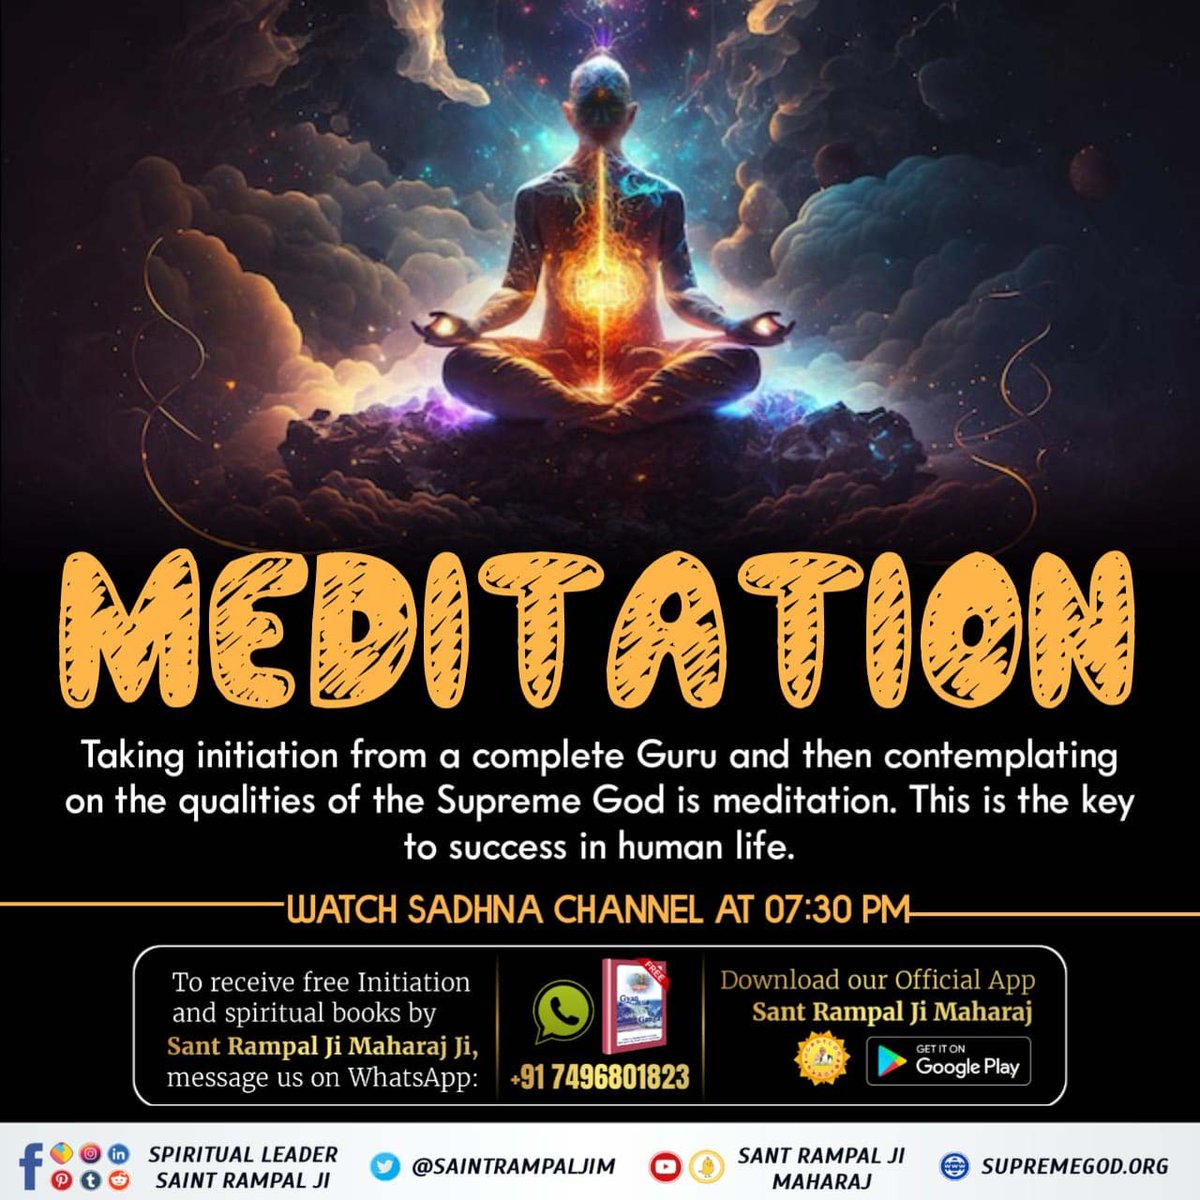 #What_Is_Meditation - True meditation is when one attains True Scriptural Instruction from a Complete Saint & contemplates on the recitation of True Naam (Mantra) without forcing oneself into assuming any meditative postures. Only Sant Rampal Ji Maharaj grants True Mantra.